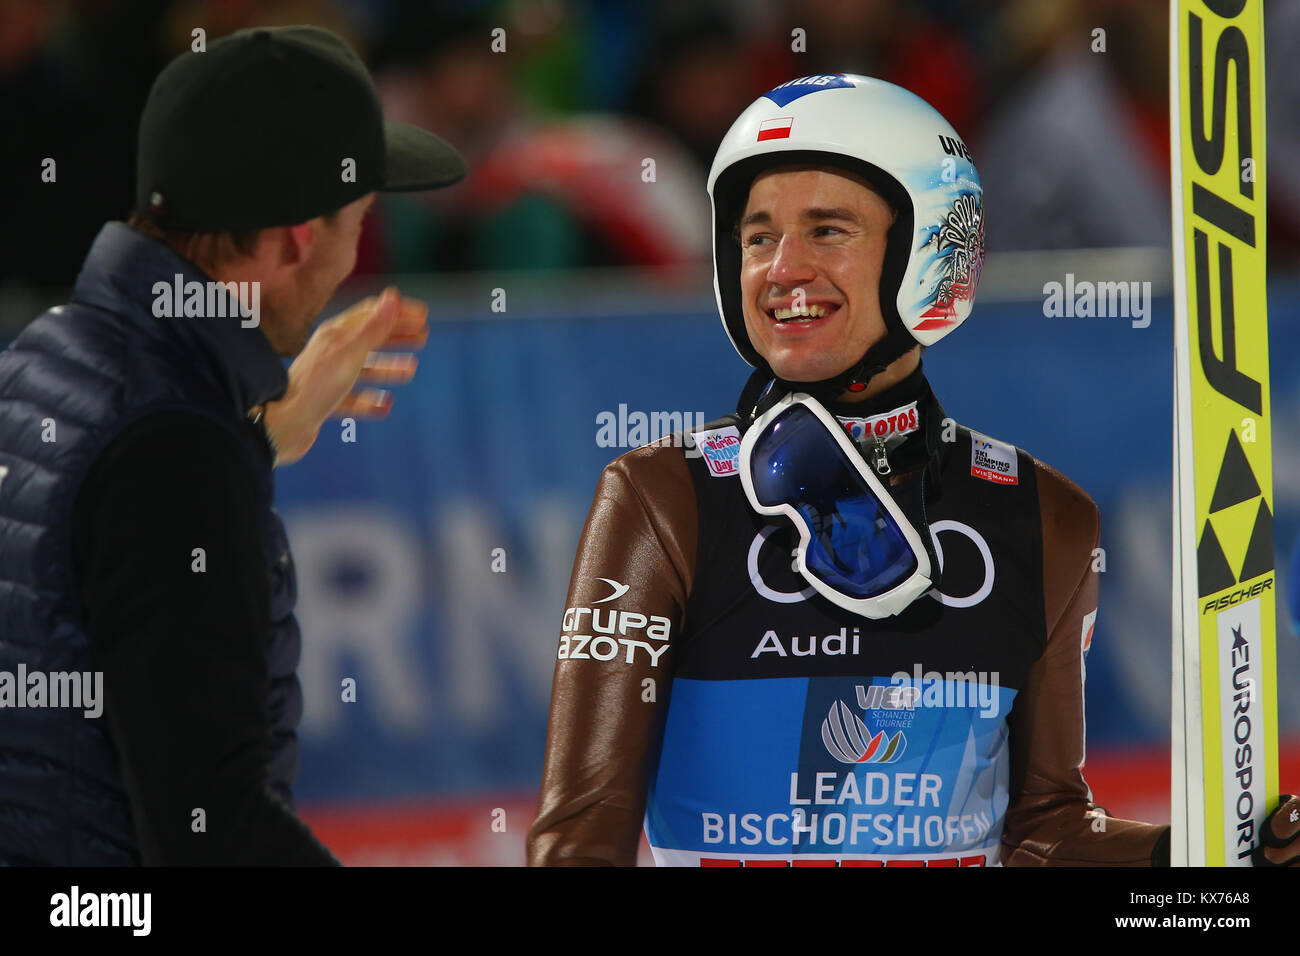 Bischofshofen, Austria. 06th, Jan, 2018. Germany's former ski jumper Sven Hannawald (left), who won all four stages of the Four Hills ski jumping event in 2002, congratulate with winner of the 66th Four Hills Ski Jumping event, overall winner Kamil Stoch (right), in Bischofshofen, Austria, 06 January 2018. (PHOTO) Alejandro Sala/Alamy Live News Stock Photo